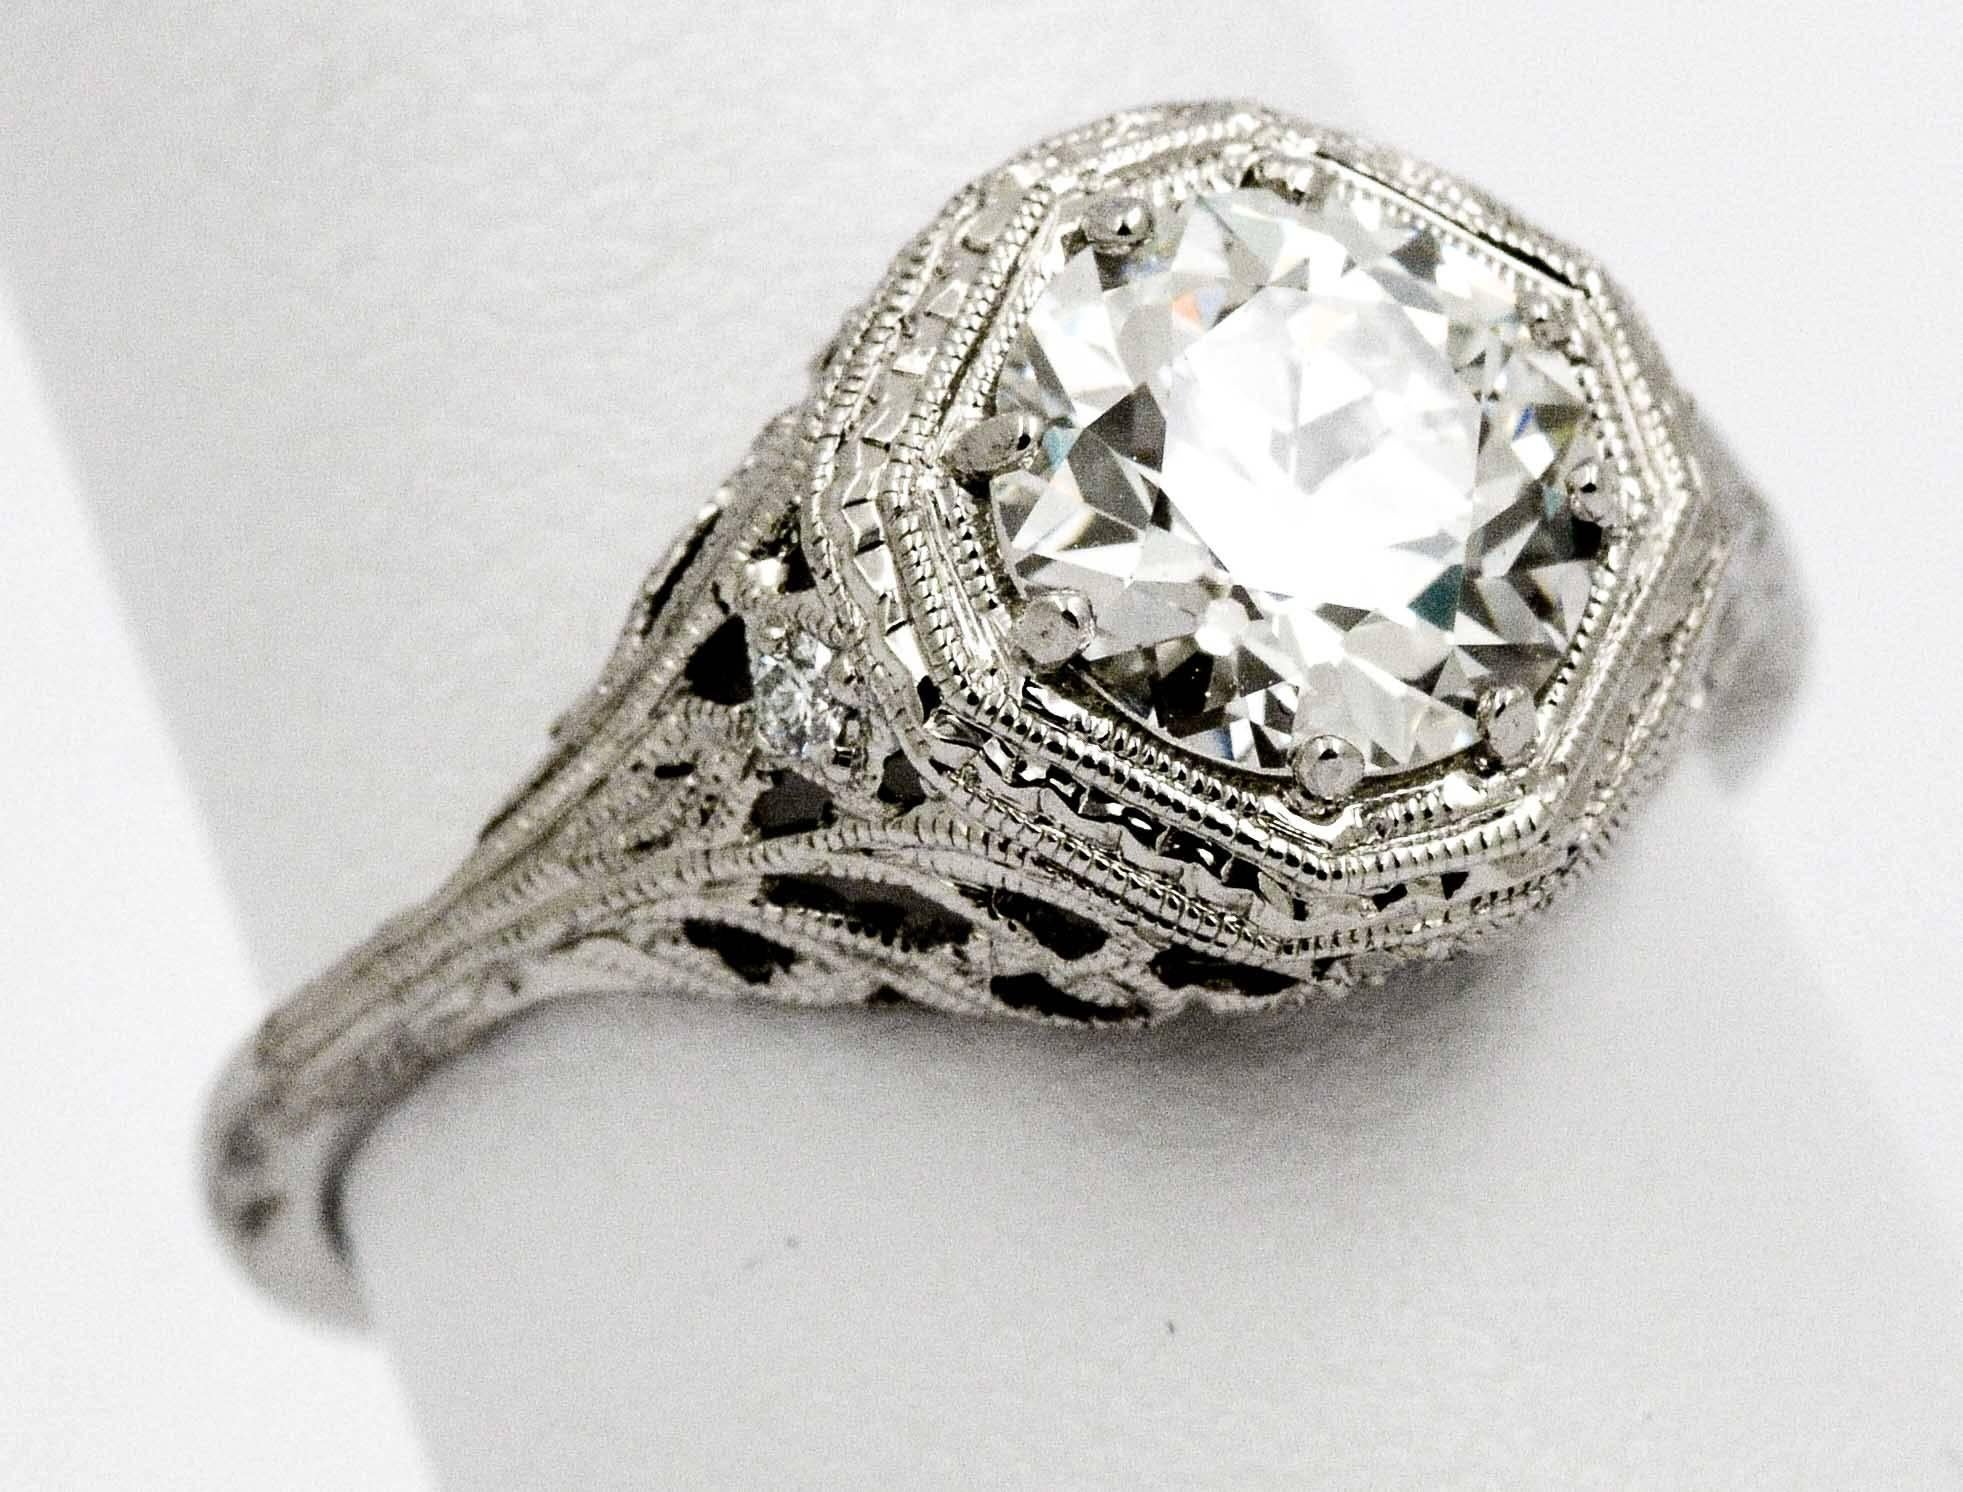 It's as if you have gone back in time with this classic Art Deco engagement ring. With flaring style this 1.52 carats round European cut diamond, with G color and VS2 clarity, is sure to catch many an eye.  The diamond is expertly set in the center